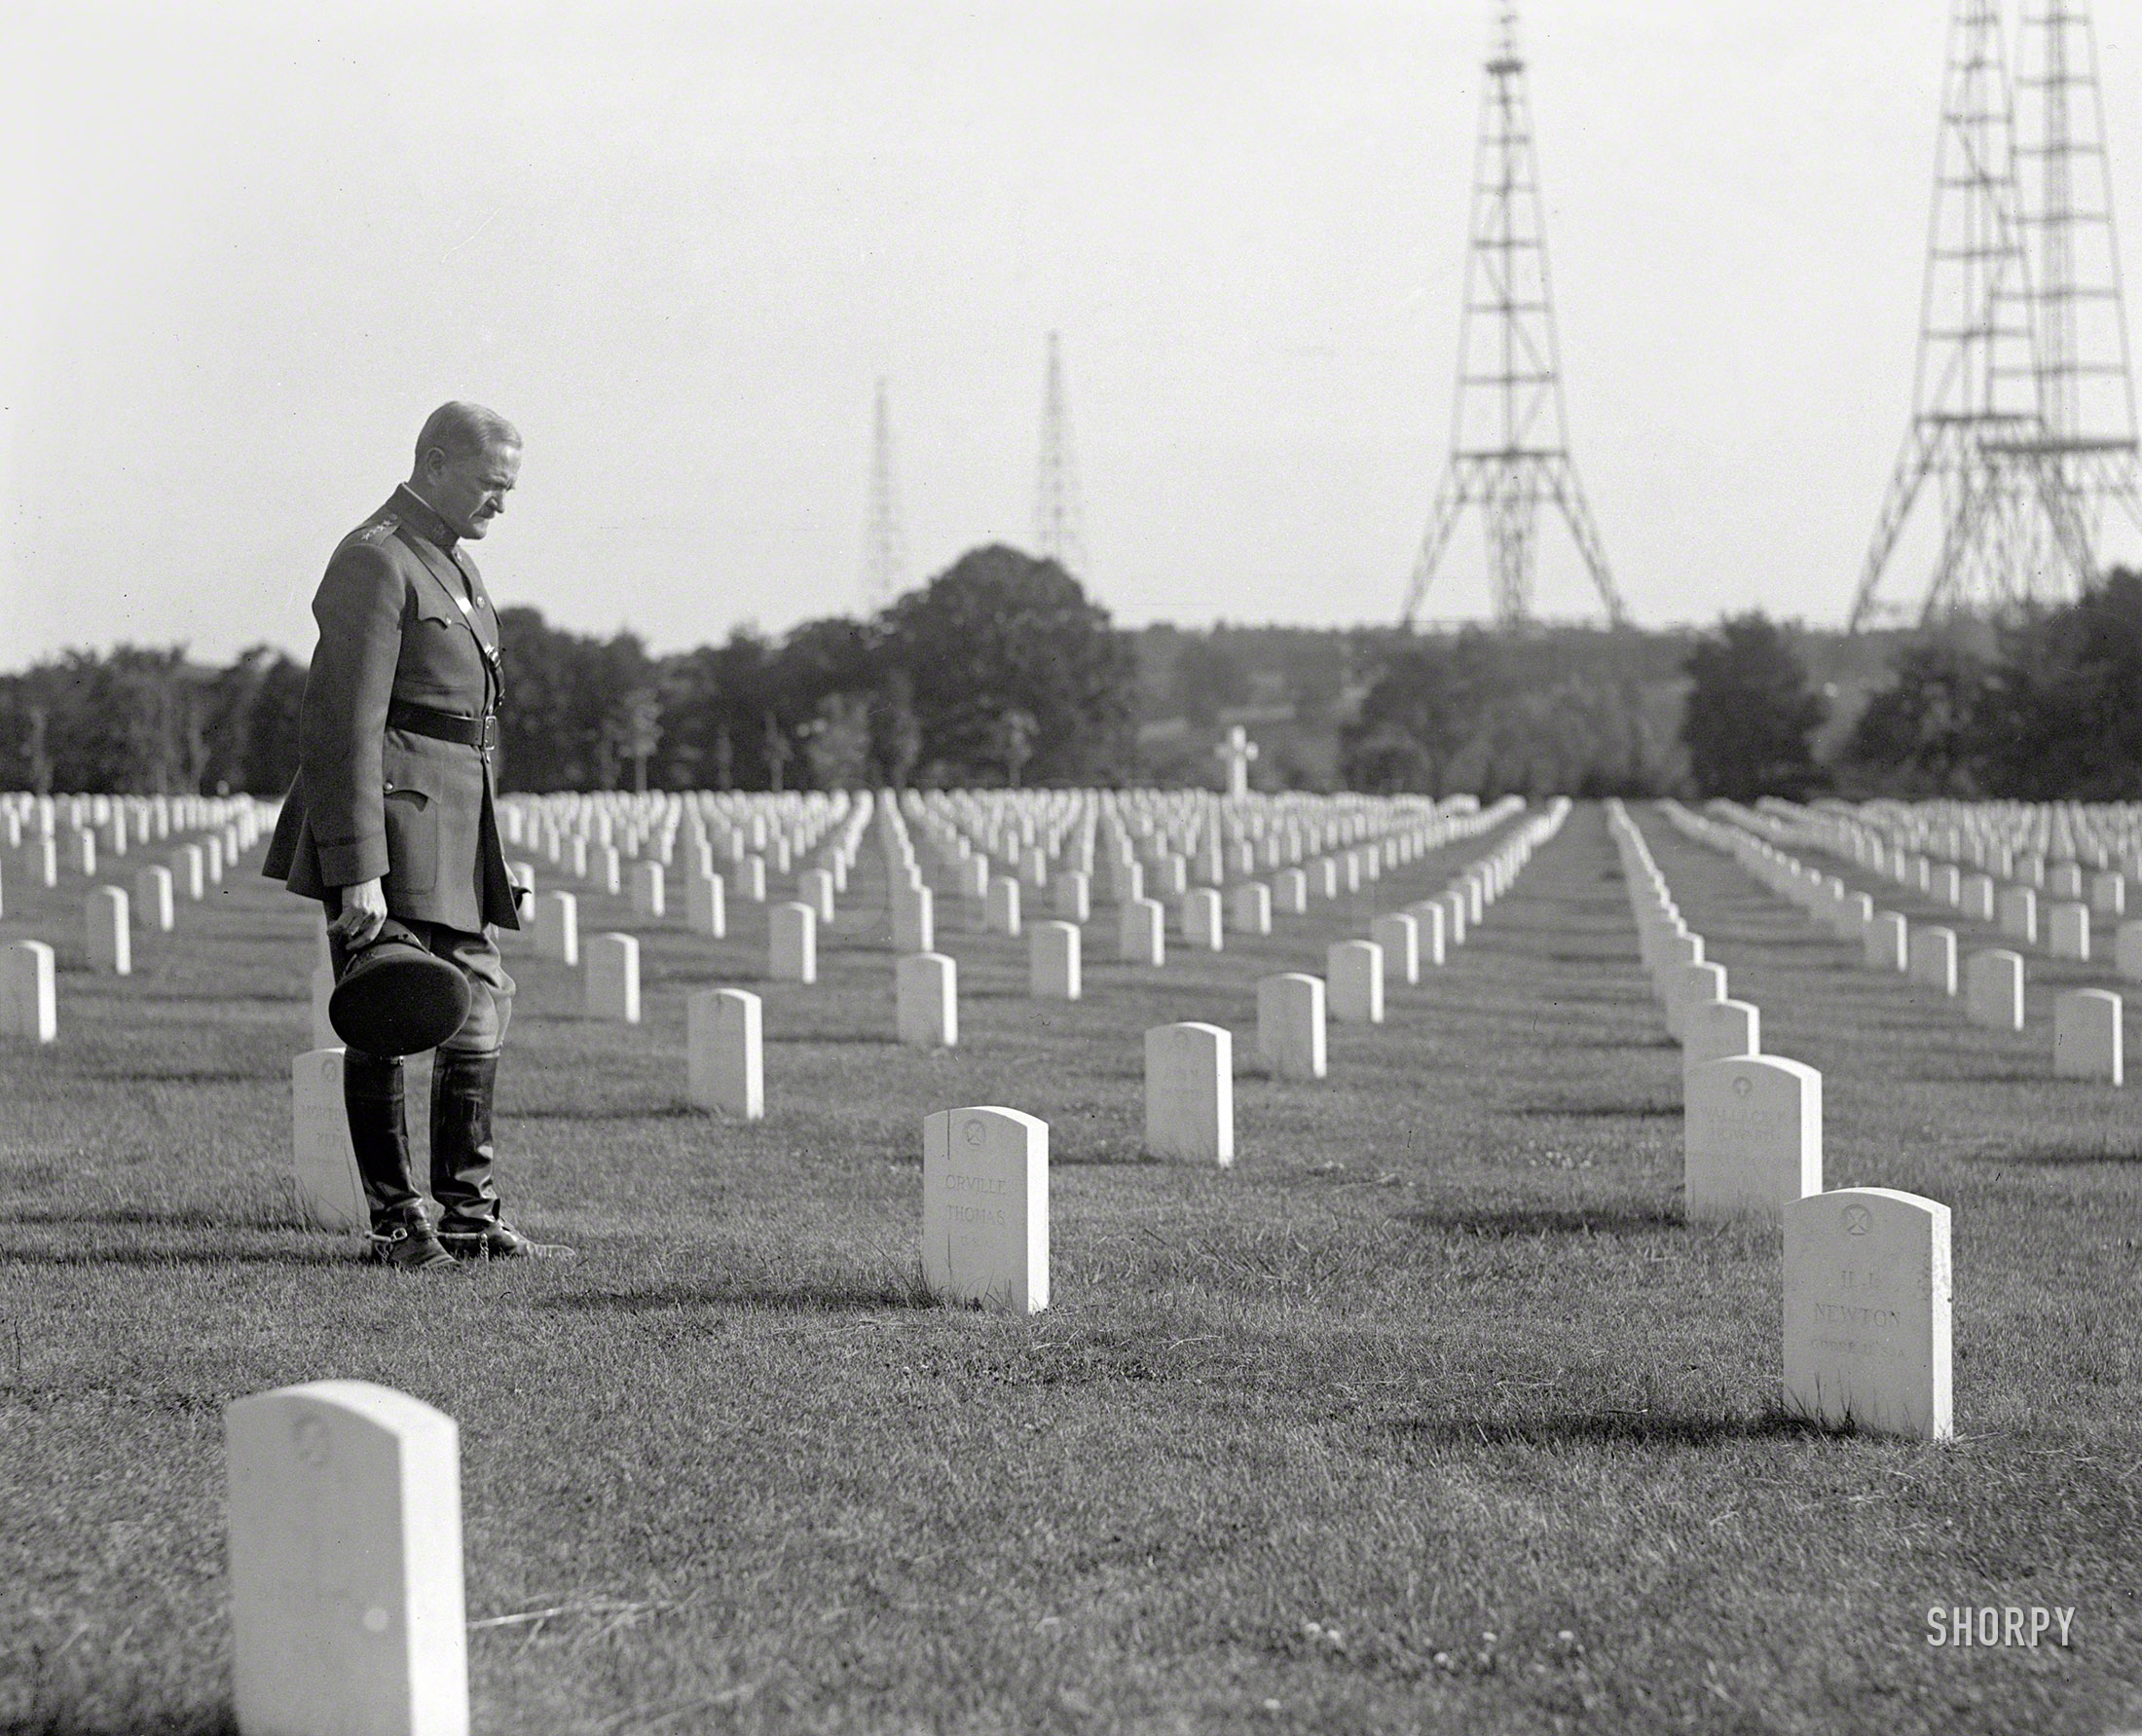 May 26, 1925. "Gen. Pershing at Arlington National Cemetery." Standing watch: masts for the Navy's wireless station, built in 1912 at Fort Myer. View full size.